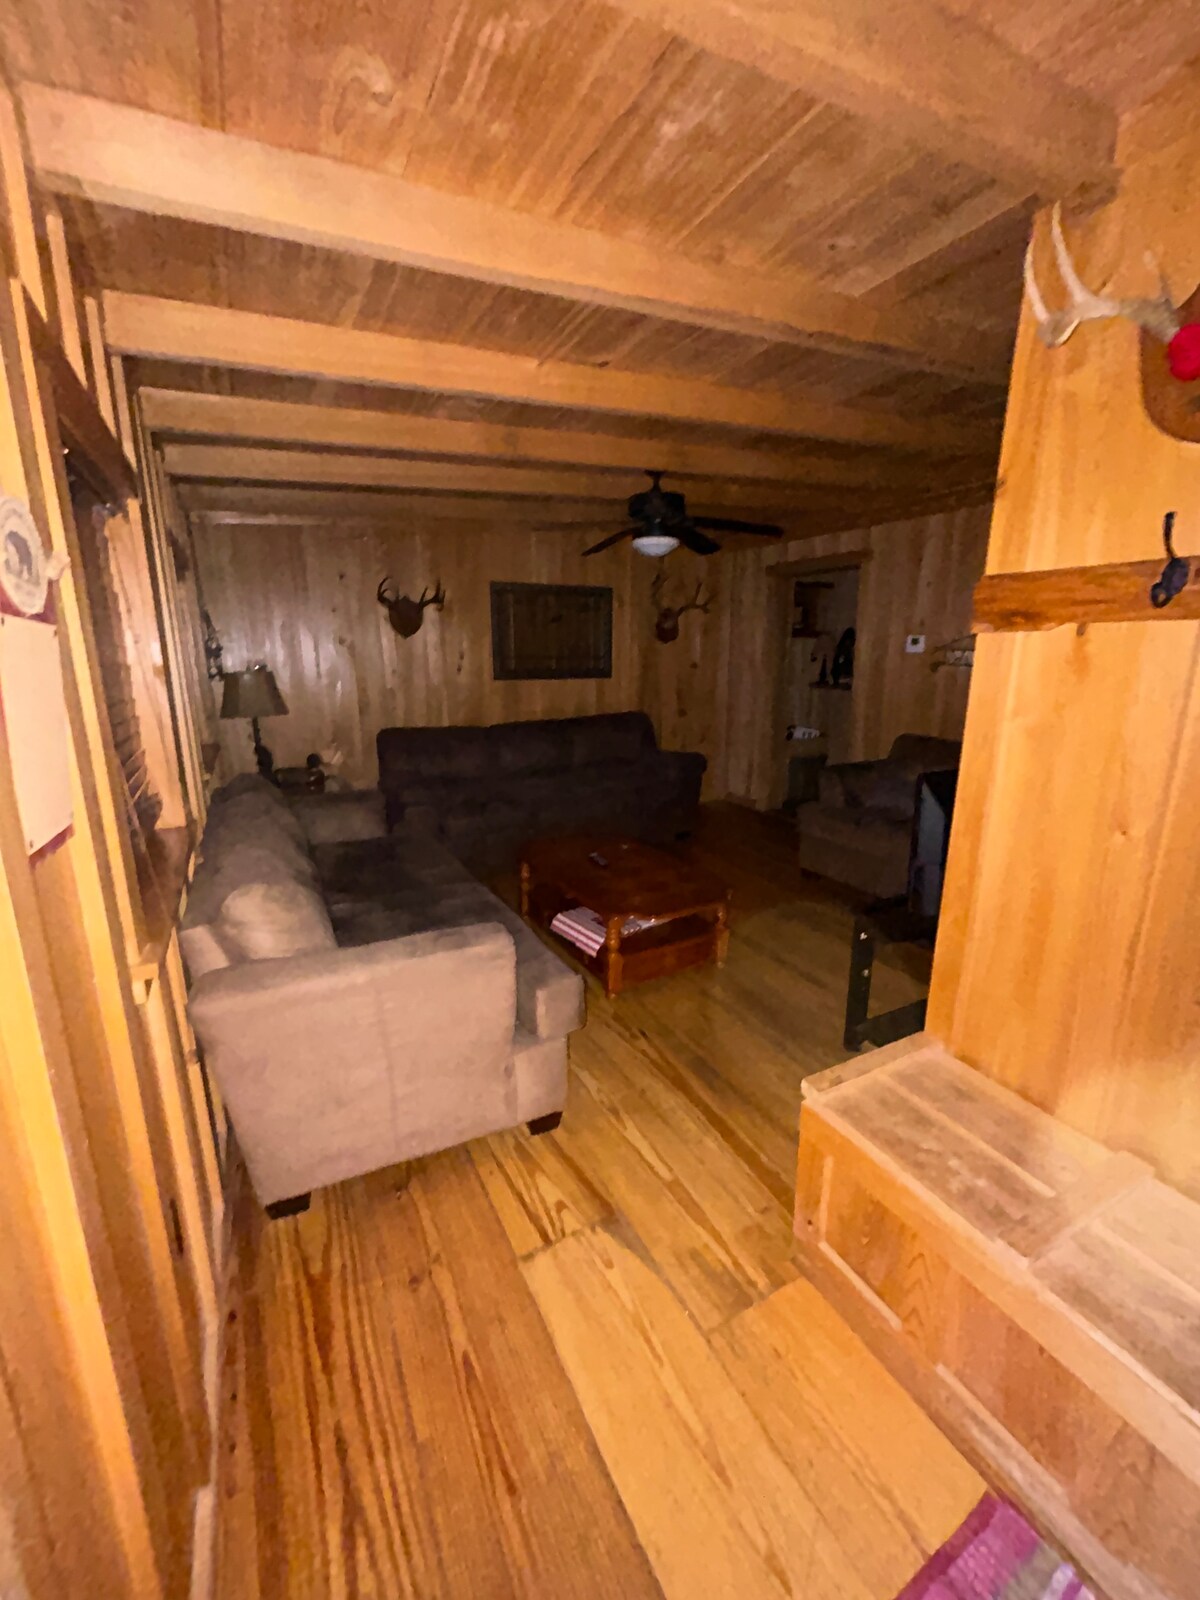 3 bedroom cabin on the lake